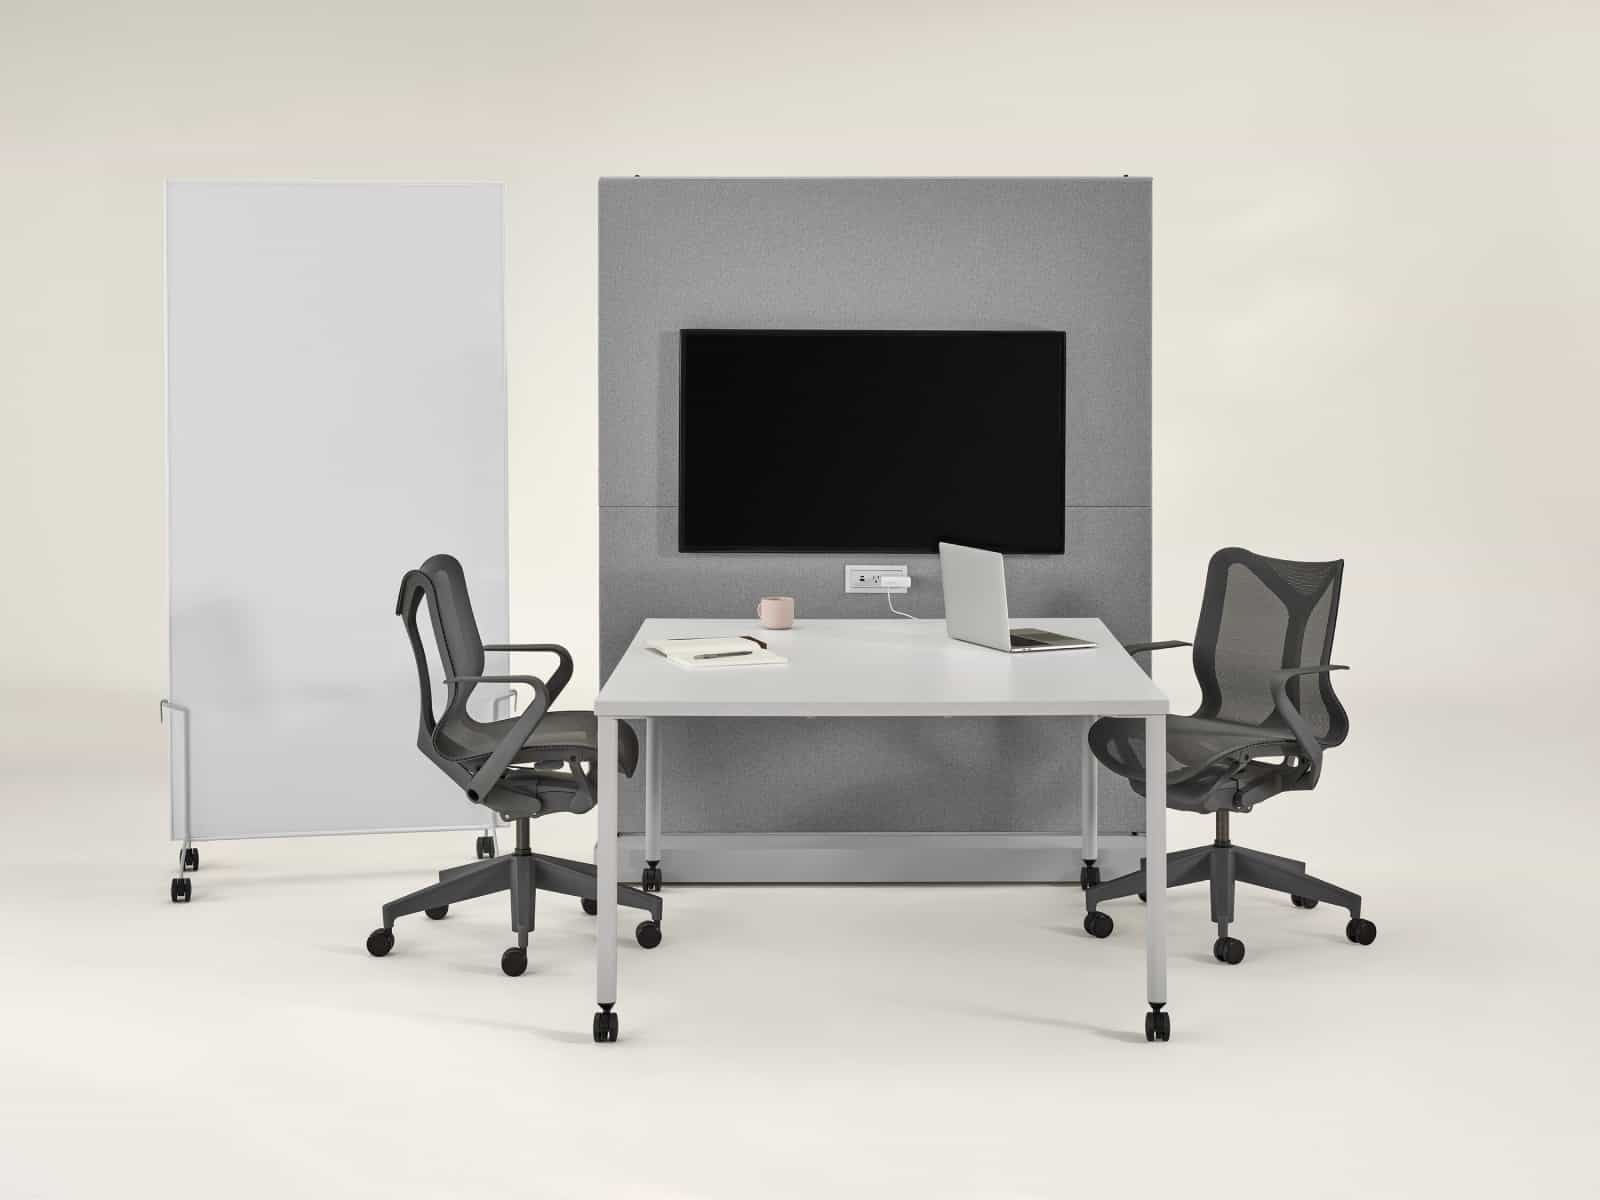 Grey OE1 Agile Wall with grey OE1 Project Table, grey OE1 Mobile Easel and marker board and dark grey Cosm Chairs.